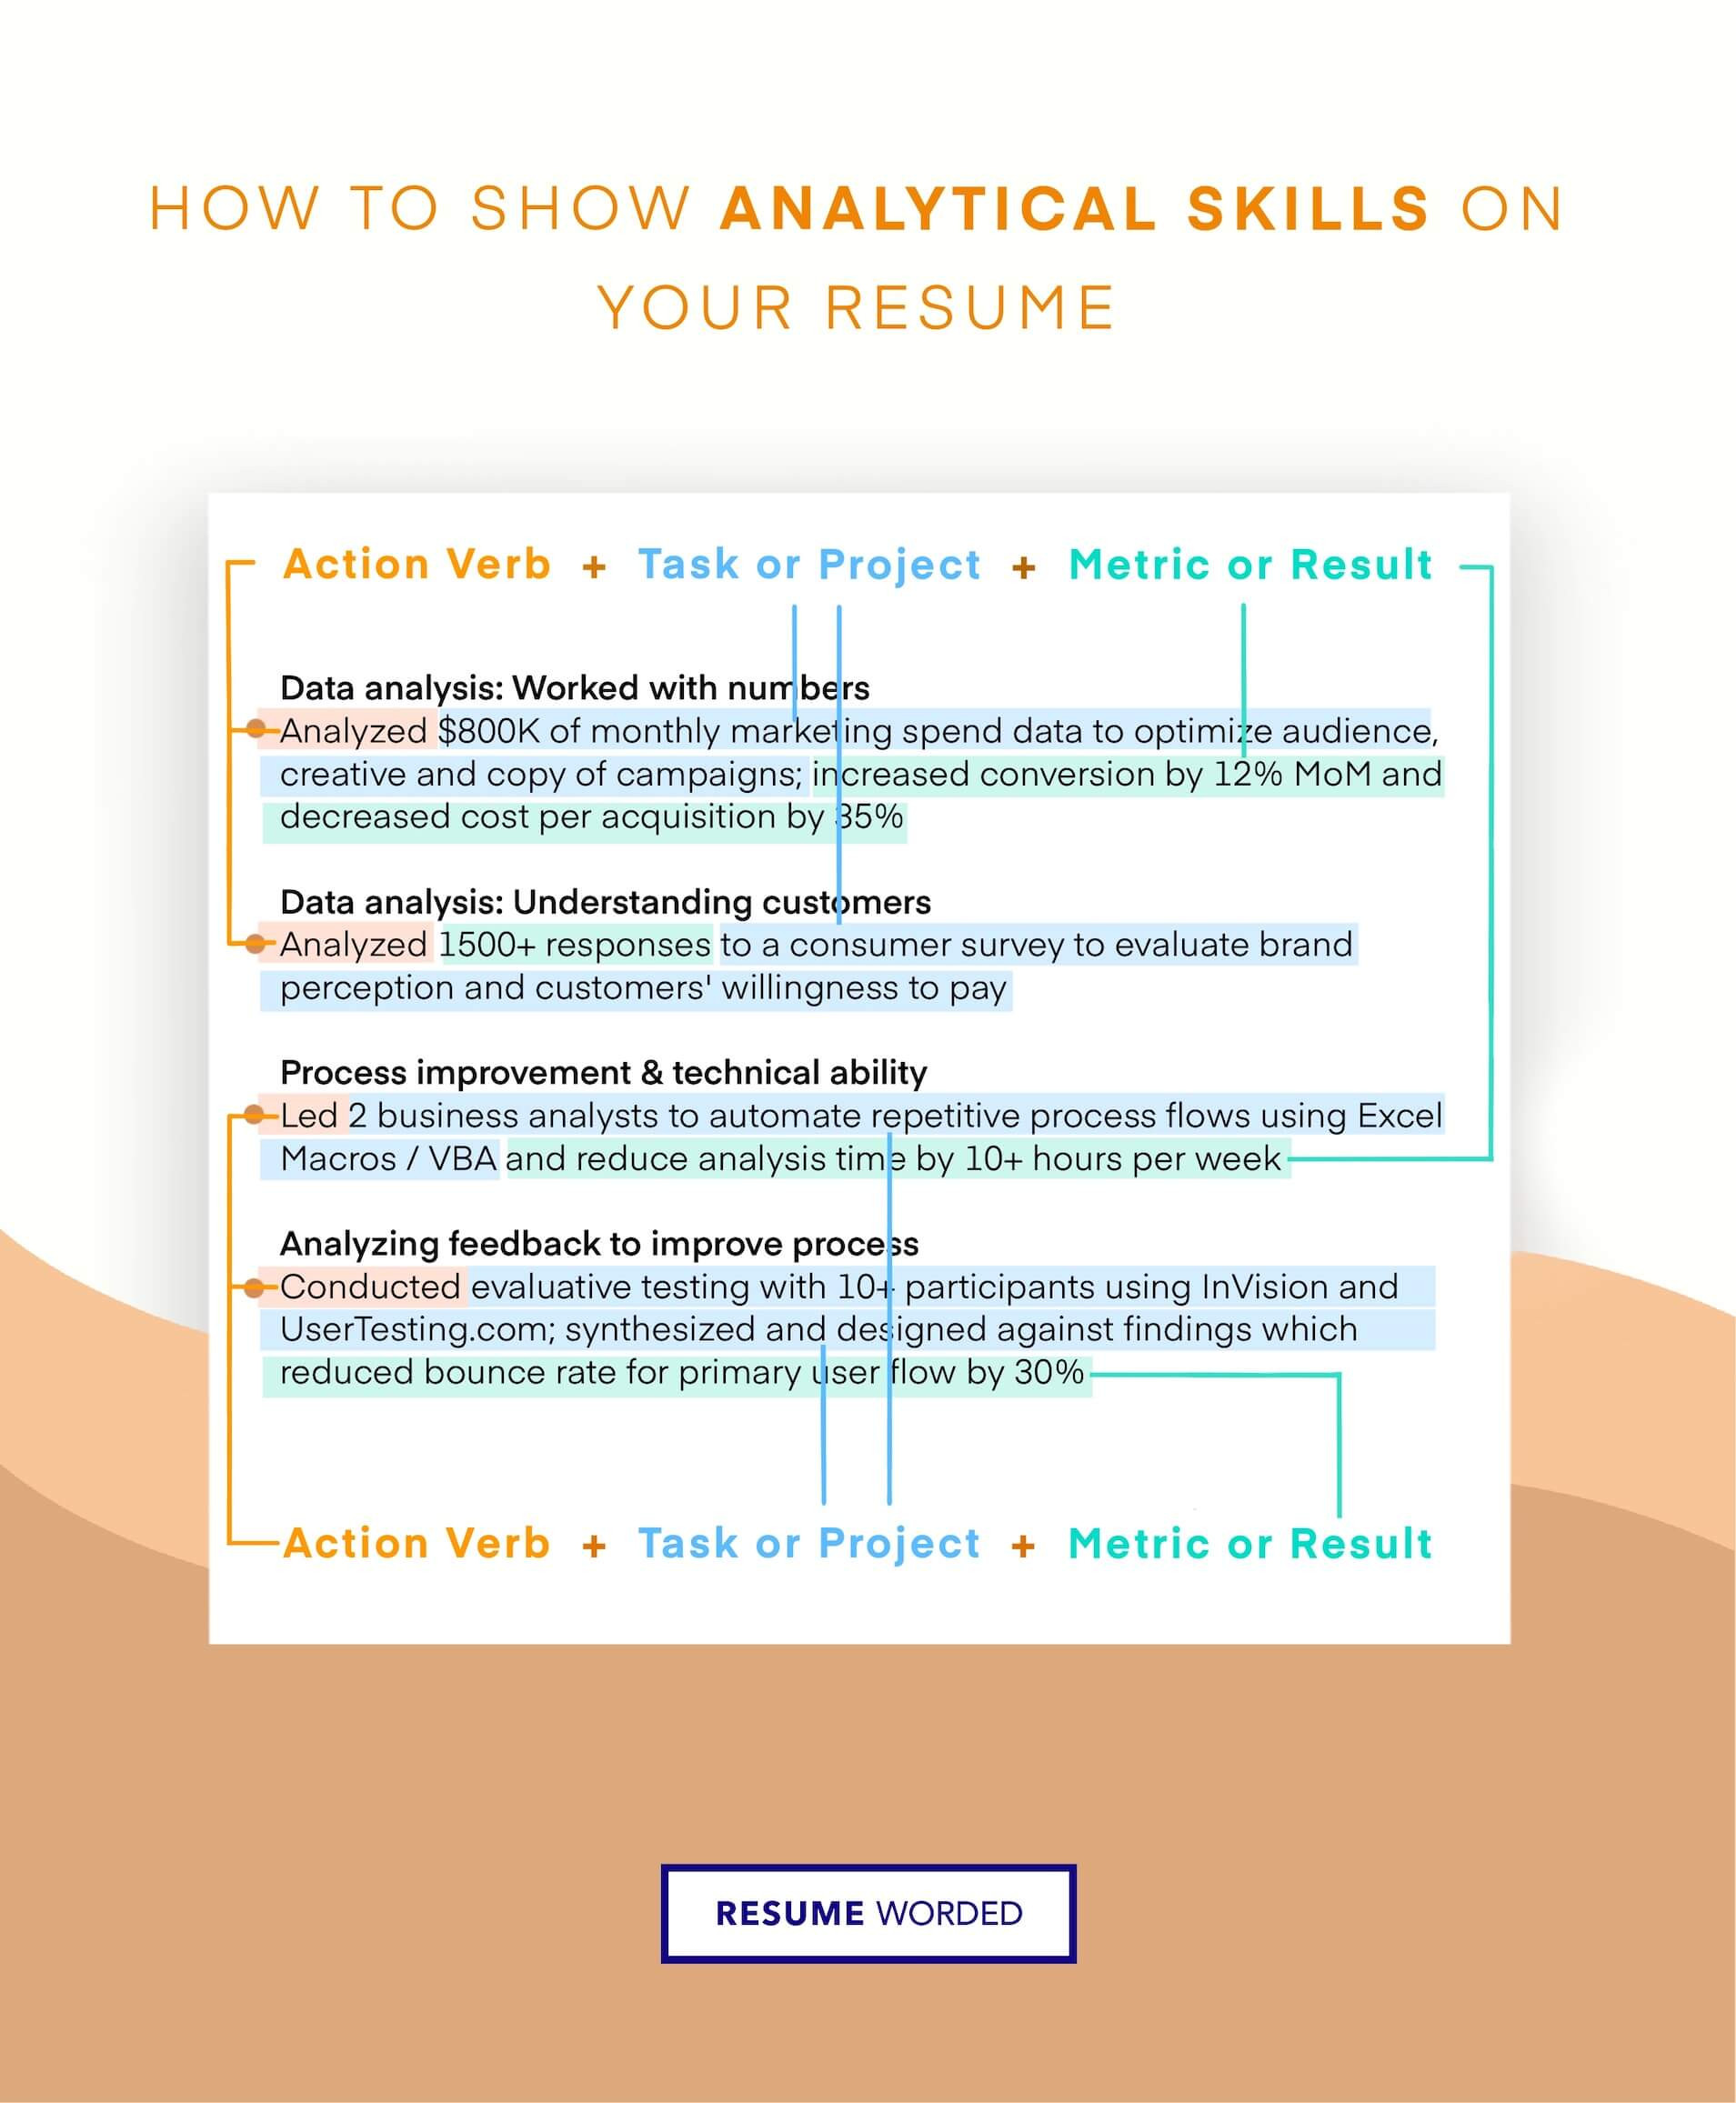 Highlighting Analytical Skills On Sample Resume Analyze This: How to Demonstrate Analytical Skills On Your Resume